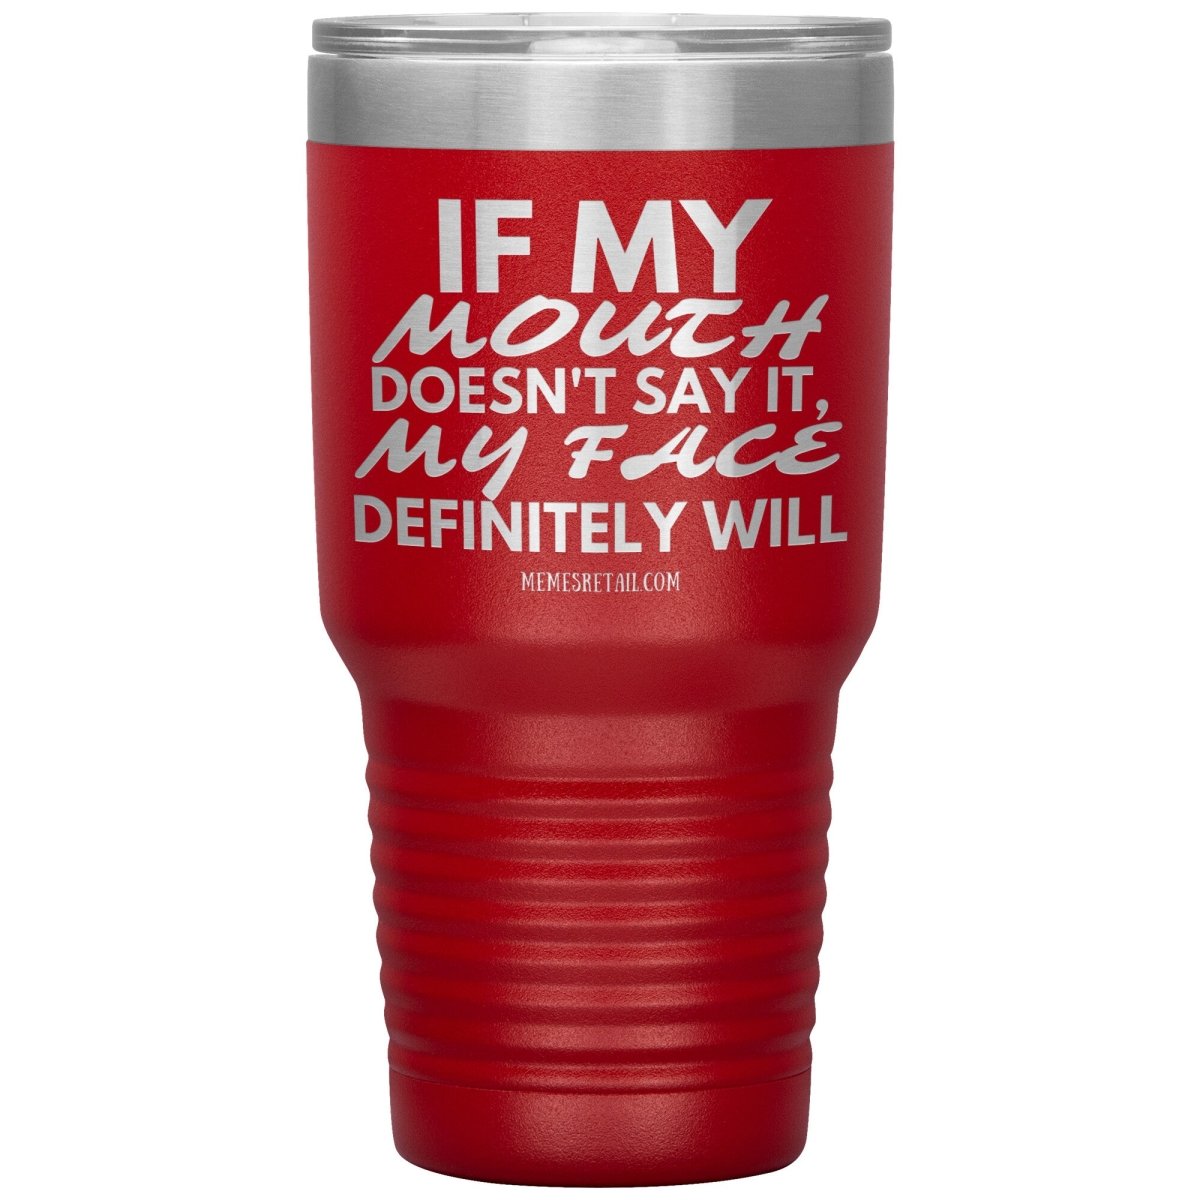 If my mouth doesn't say it, my face definitely will Tumblers, 30oz Insulated Tumbler / Red - MemesRetail.com